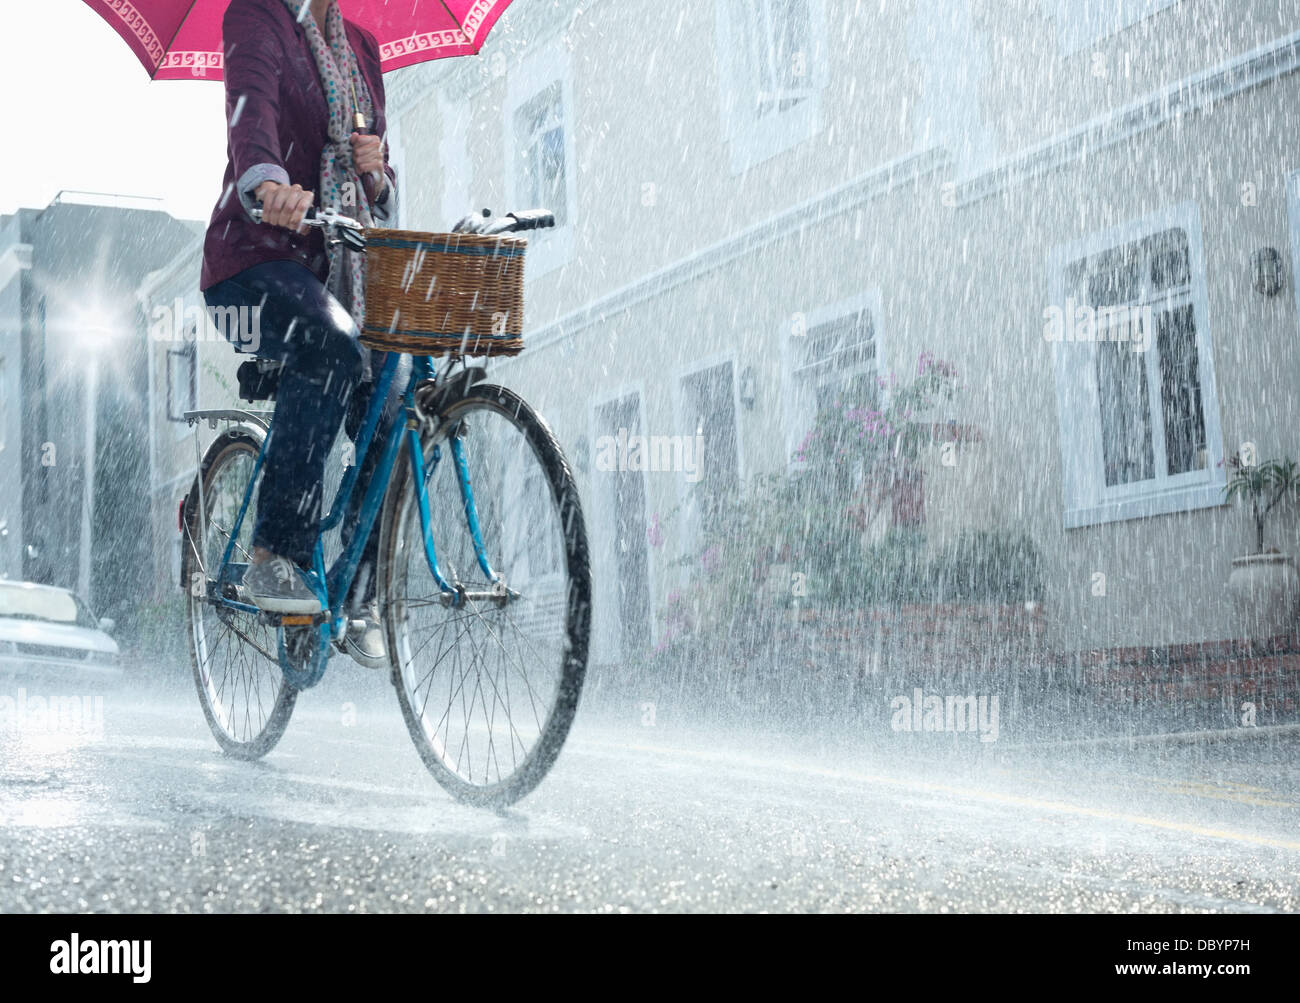 Woman riding bicycle with umbrella in rainy street Stock Photo